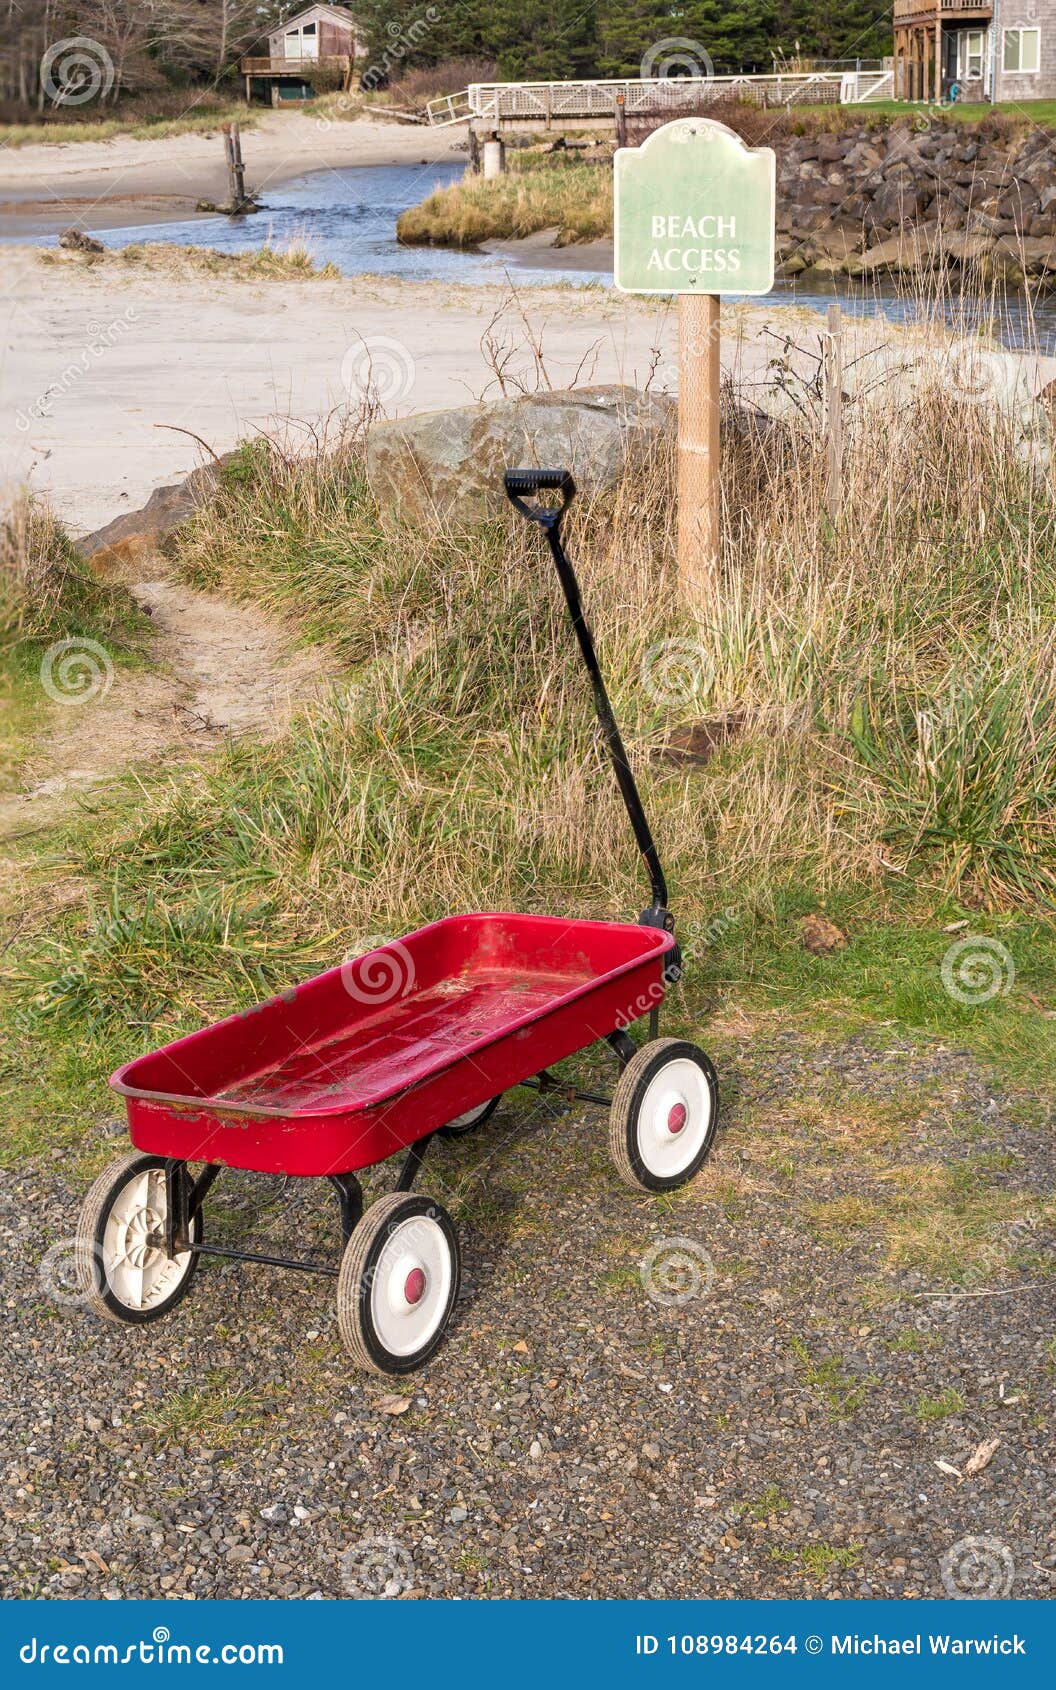 New 16x20 Little red wagon picture